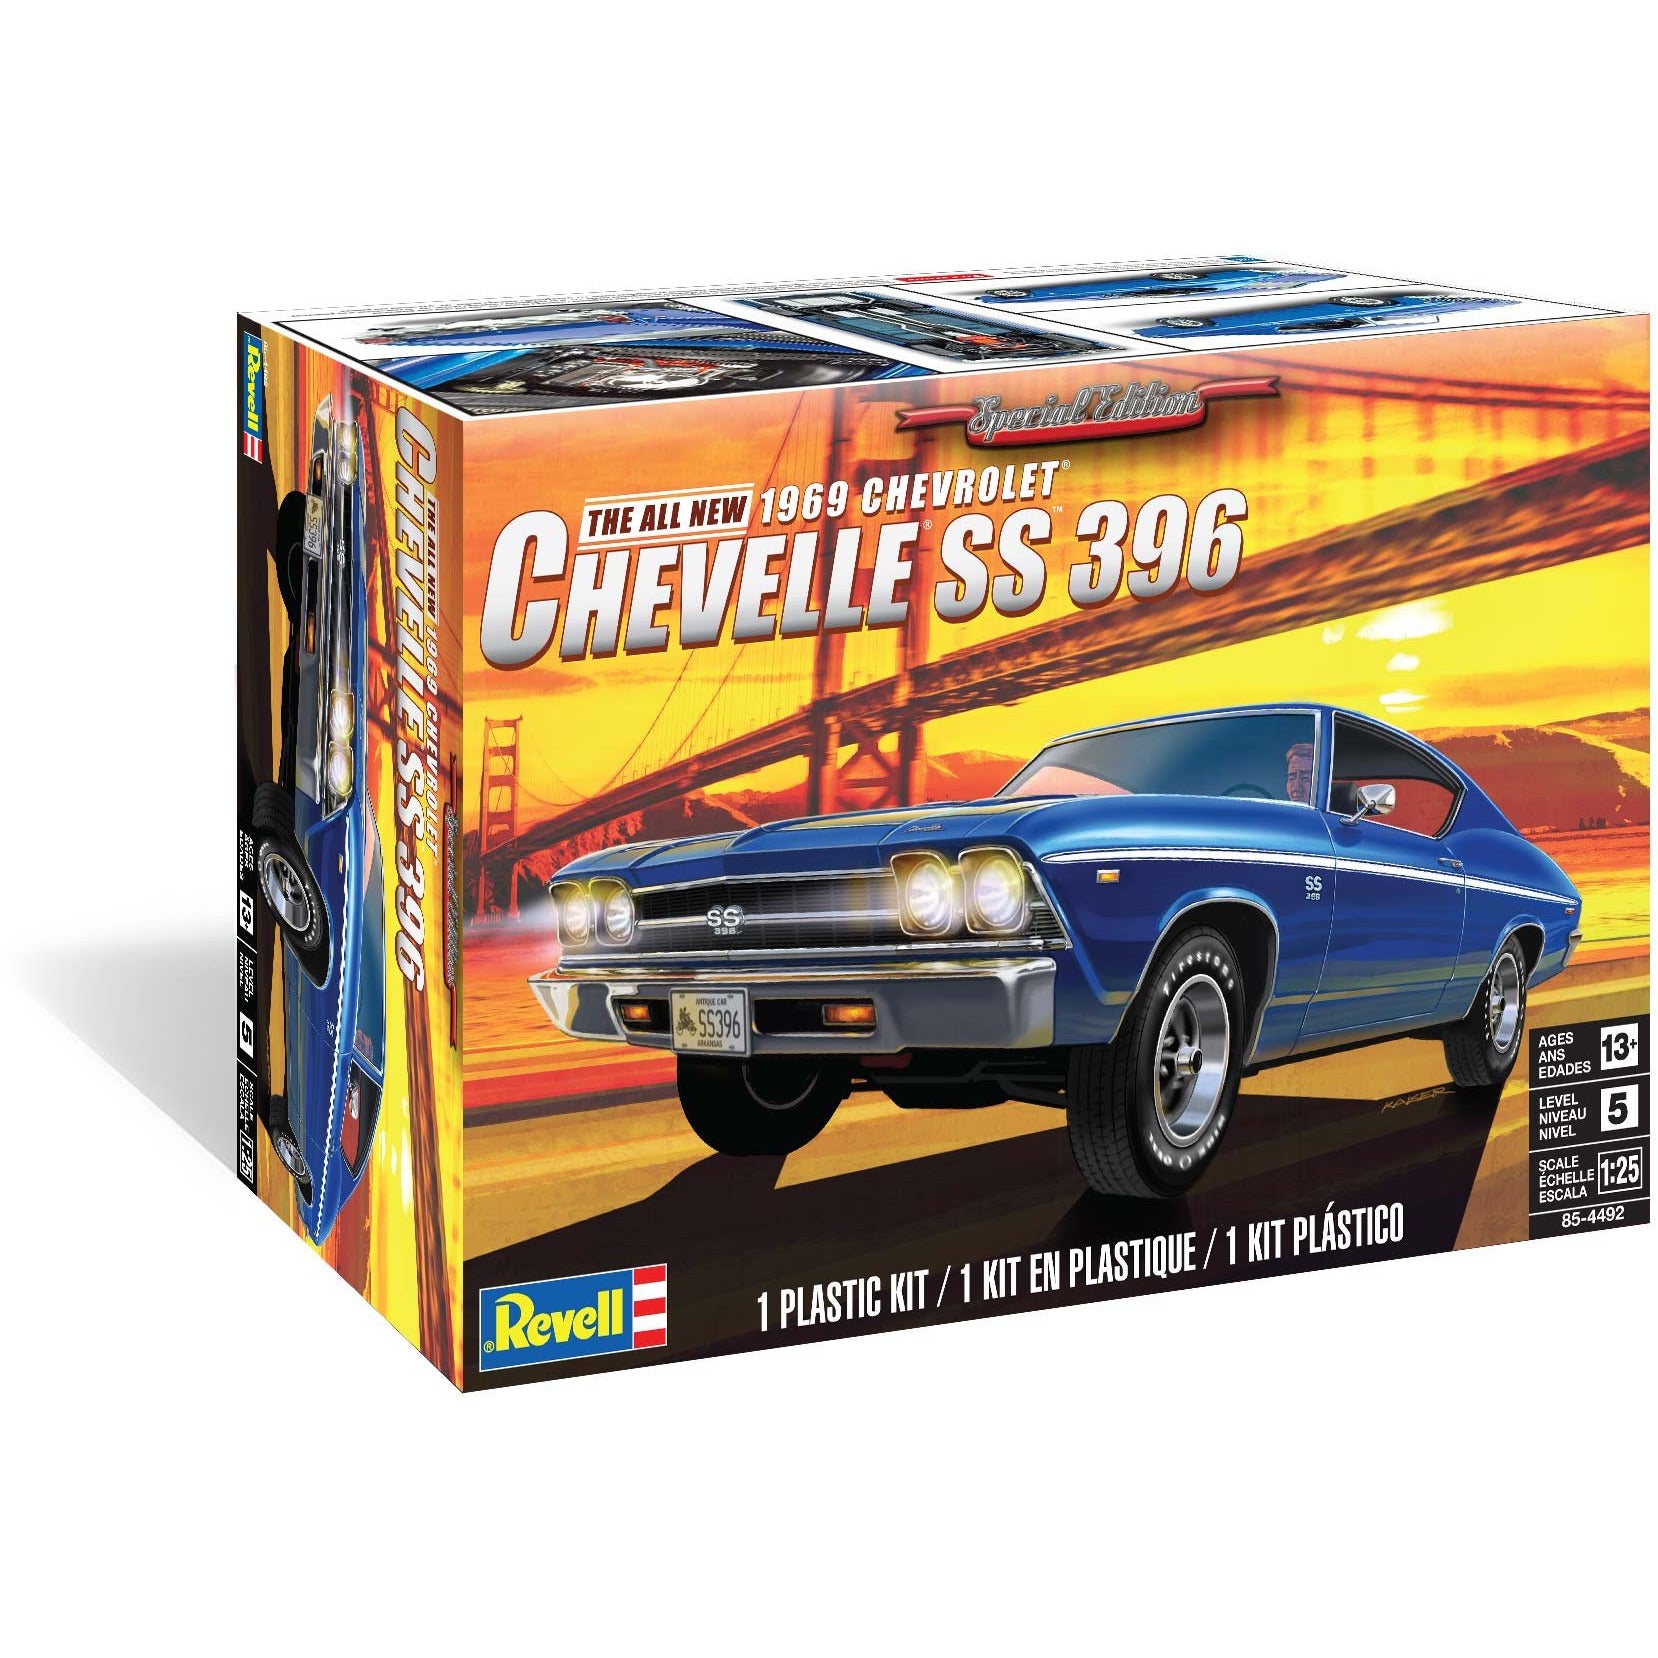 1969 Chevy Chevelle SS 396 1/25 Model Car Kit #4492 by Revell